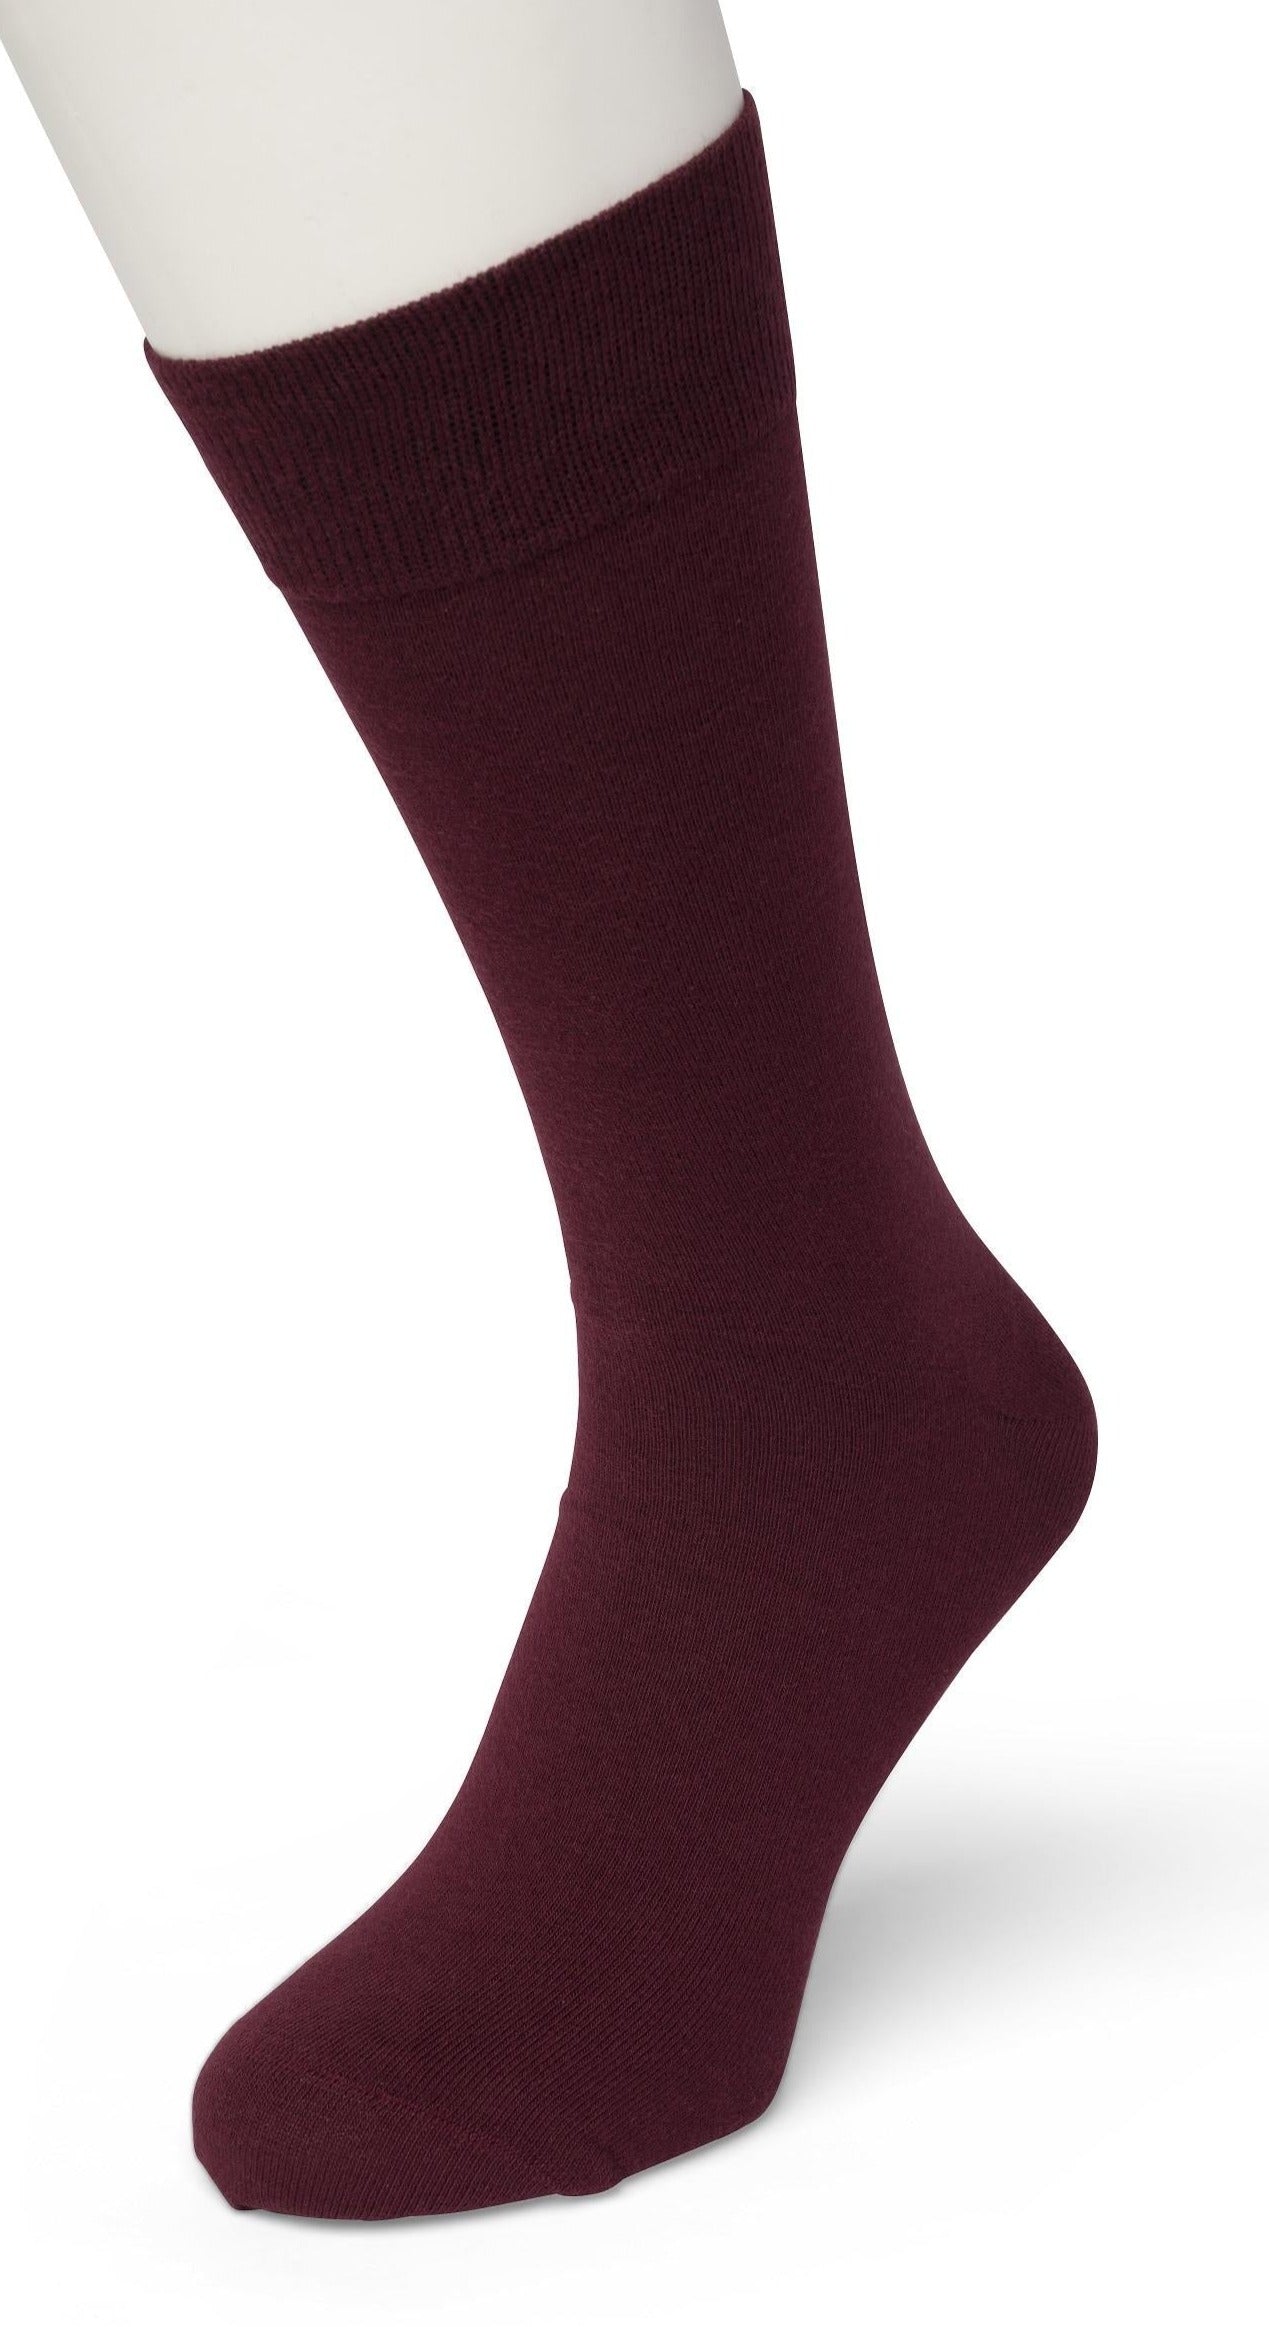 Bonnie Doon 83422 / BD632401 Cotton Sock - wine ankle socks available in men and women sizes.